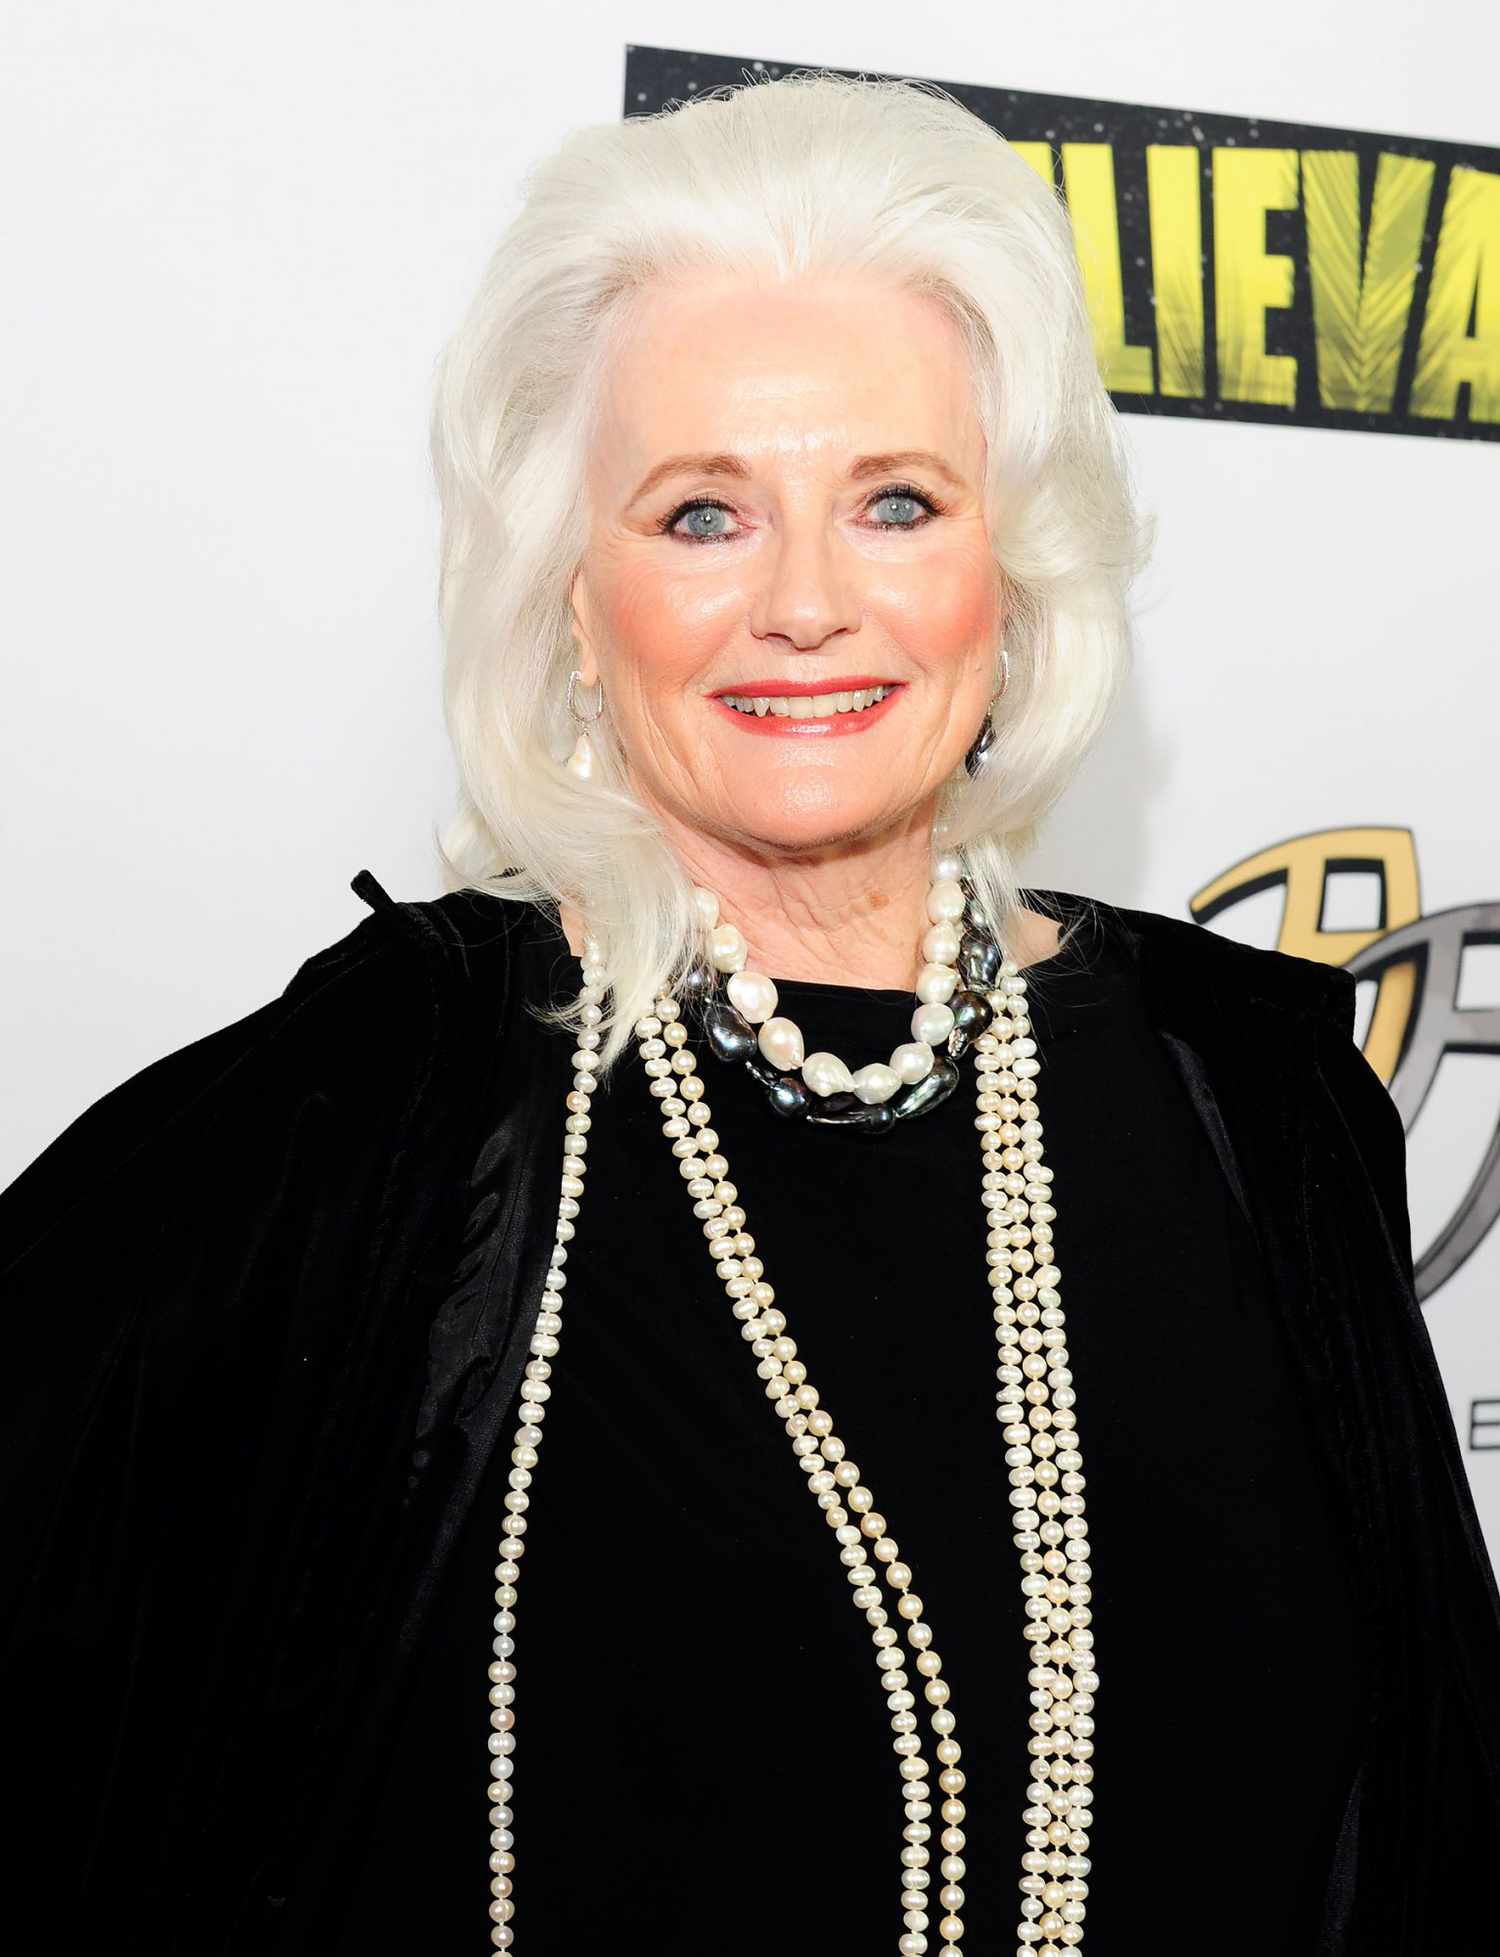 <p>Yarnall, a famed actress of the 1960s and '70s best known for her memorable turn on Star Trek, died in October. She was 74.</p>
                            <p>The official Star Trek website was the first to report the news. According to the site, Yarnall - who played Yeoman Martha Landon on the October 1967 episode "The Apple" opposite Chekov (Walter Koenig) - died at her home in Westlake Village, California, after a four-year battle with ovarian cancer.</p>
                            <p>Yarnall's husband, British artist Nazim Nazim, confirmed the news to The Hollywood Reporter. "She was magnificent in everything she did," Nazim said. "She was my beloved queen."</p>
                            